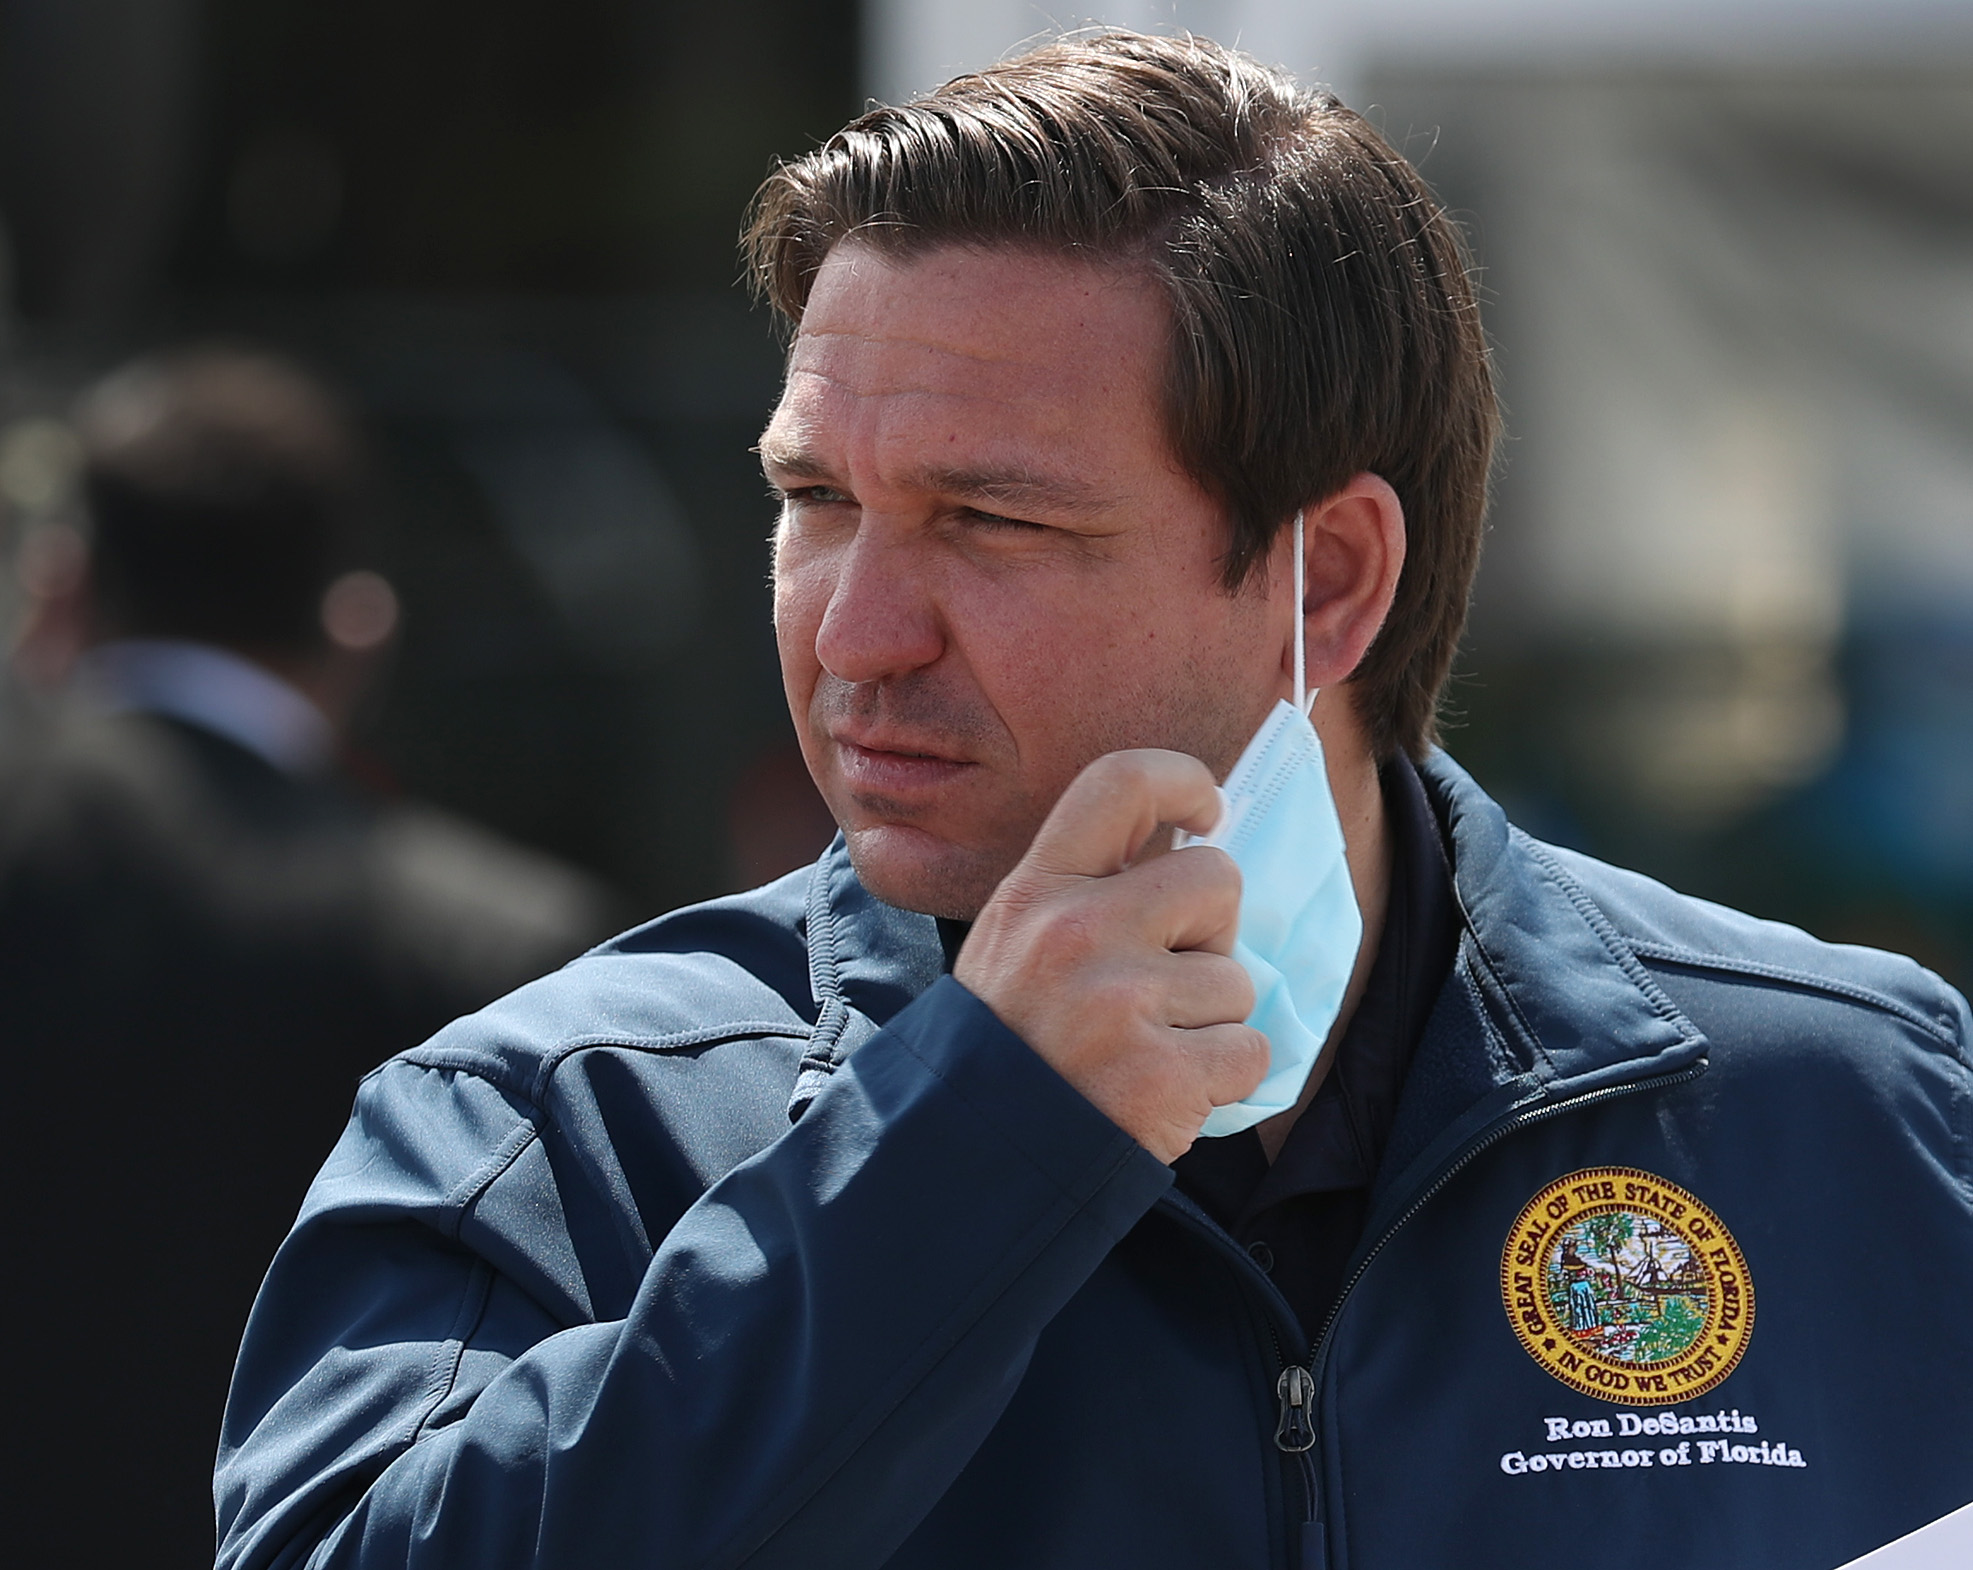 MIAMI GARDENS, FLORIDA - MAY 06: Florida Gov. Ron DeSantis takes his mask off as he prepares to speak during a press conference at the Hard Rock Stadium testing site on May 06, 2020 in Miami Gardens, Florida. Gov. DeSantis announced during the press conference that a COVID-19 antibodies test will be available. The test can show if a person has had the virus in the past without showing symptoms, and therefore may be immune to it. The test will be available to first responders and health care workers first, with the goal of being able to expand testing to the general public. (Photo by Joe Raedle/Getty Images)